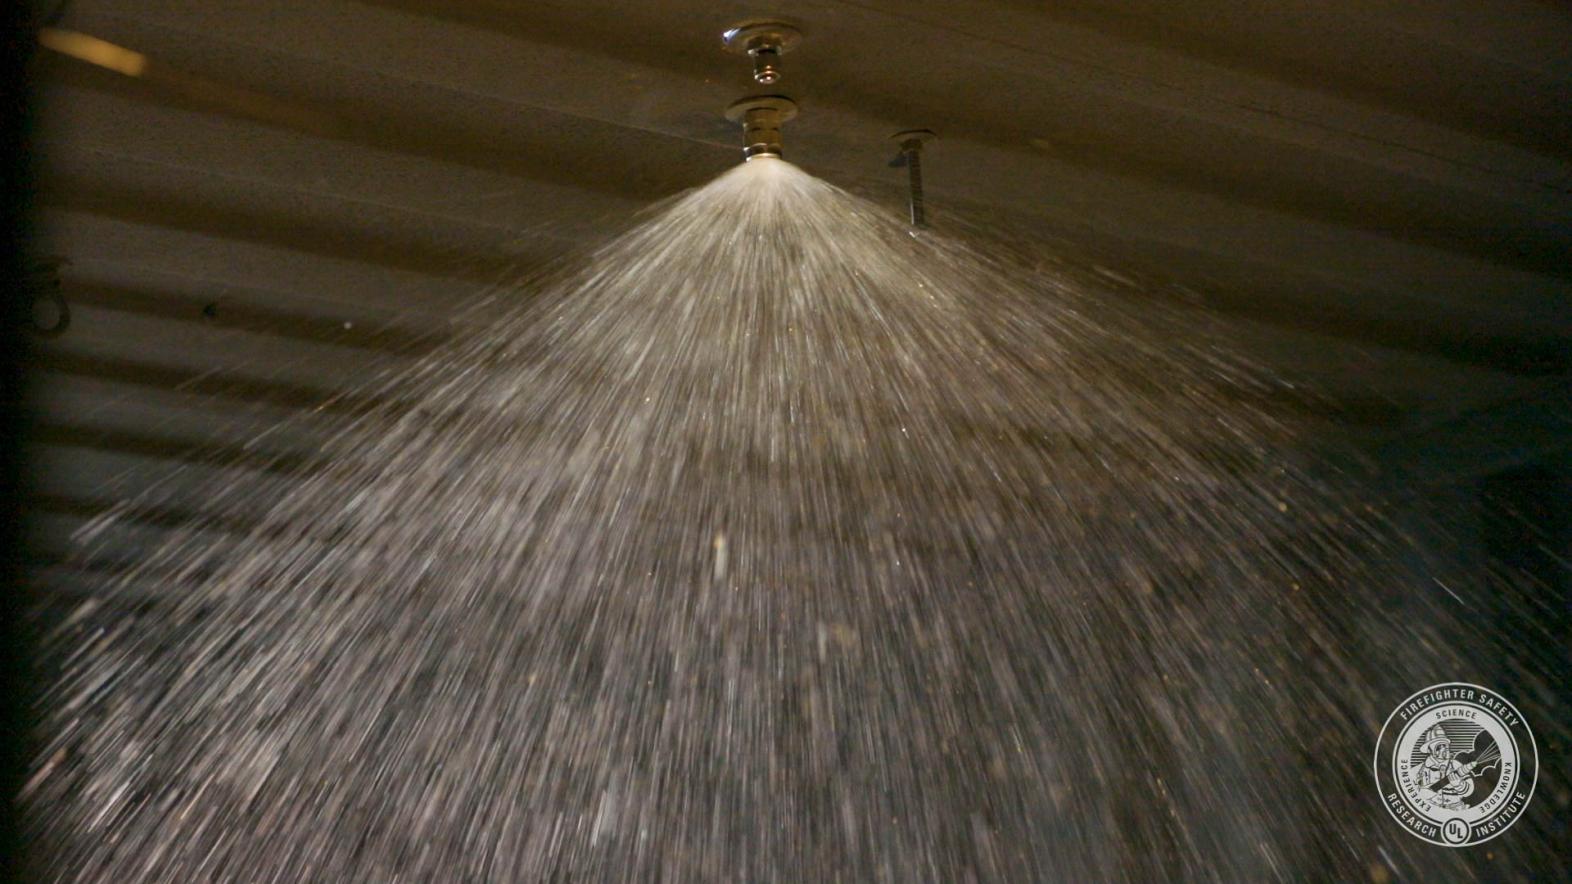 a spray nozzle flowing water at gpm